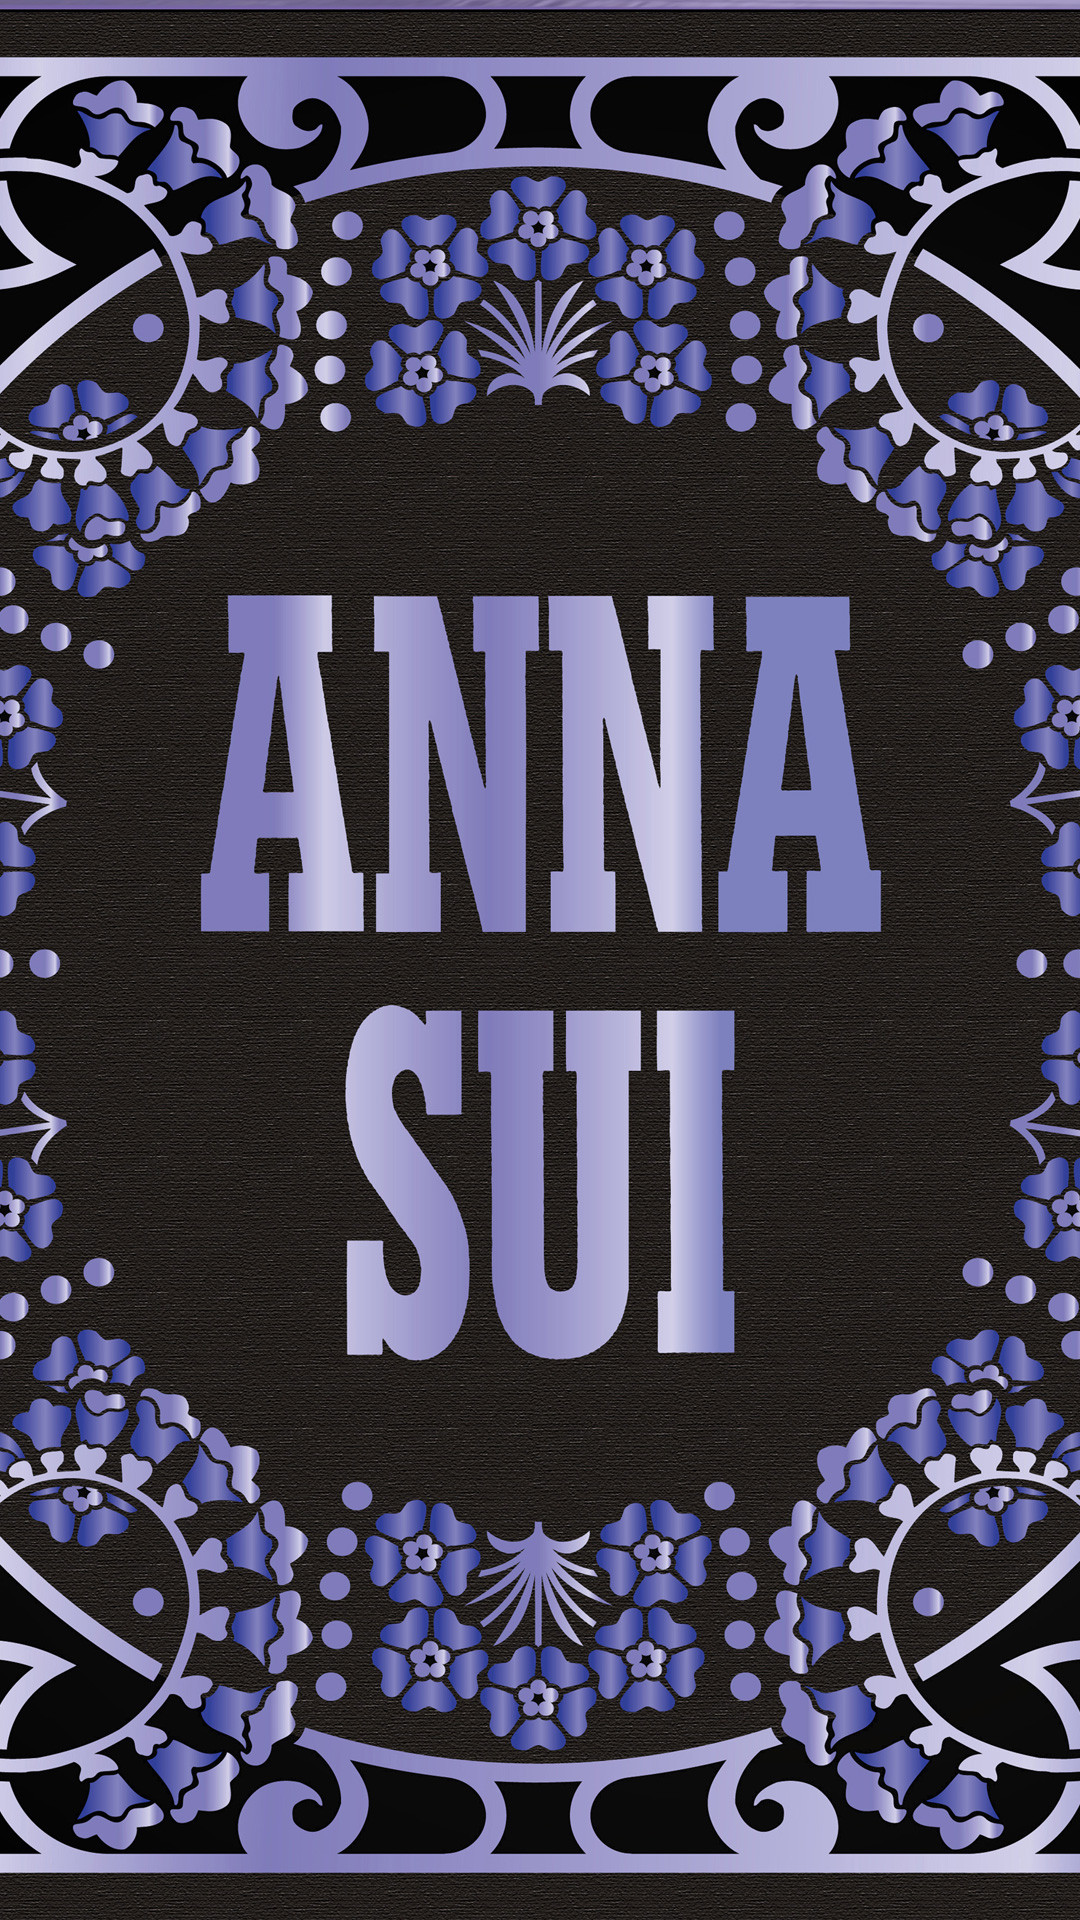 Anna Sui アナスイ 女子向けiphone壁紙 Iphone Wallpapers